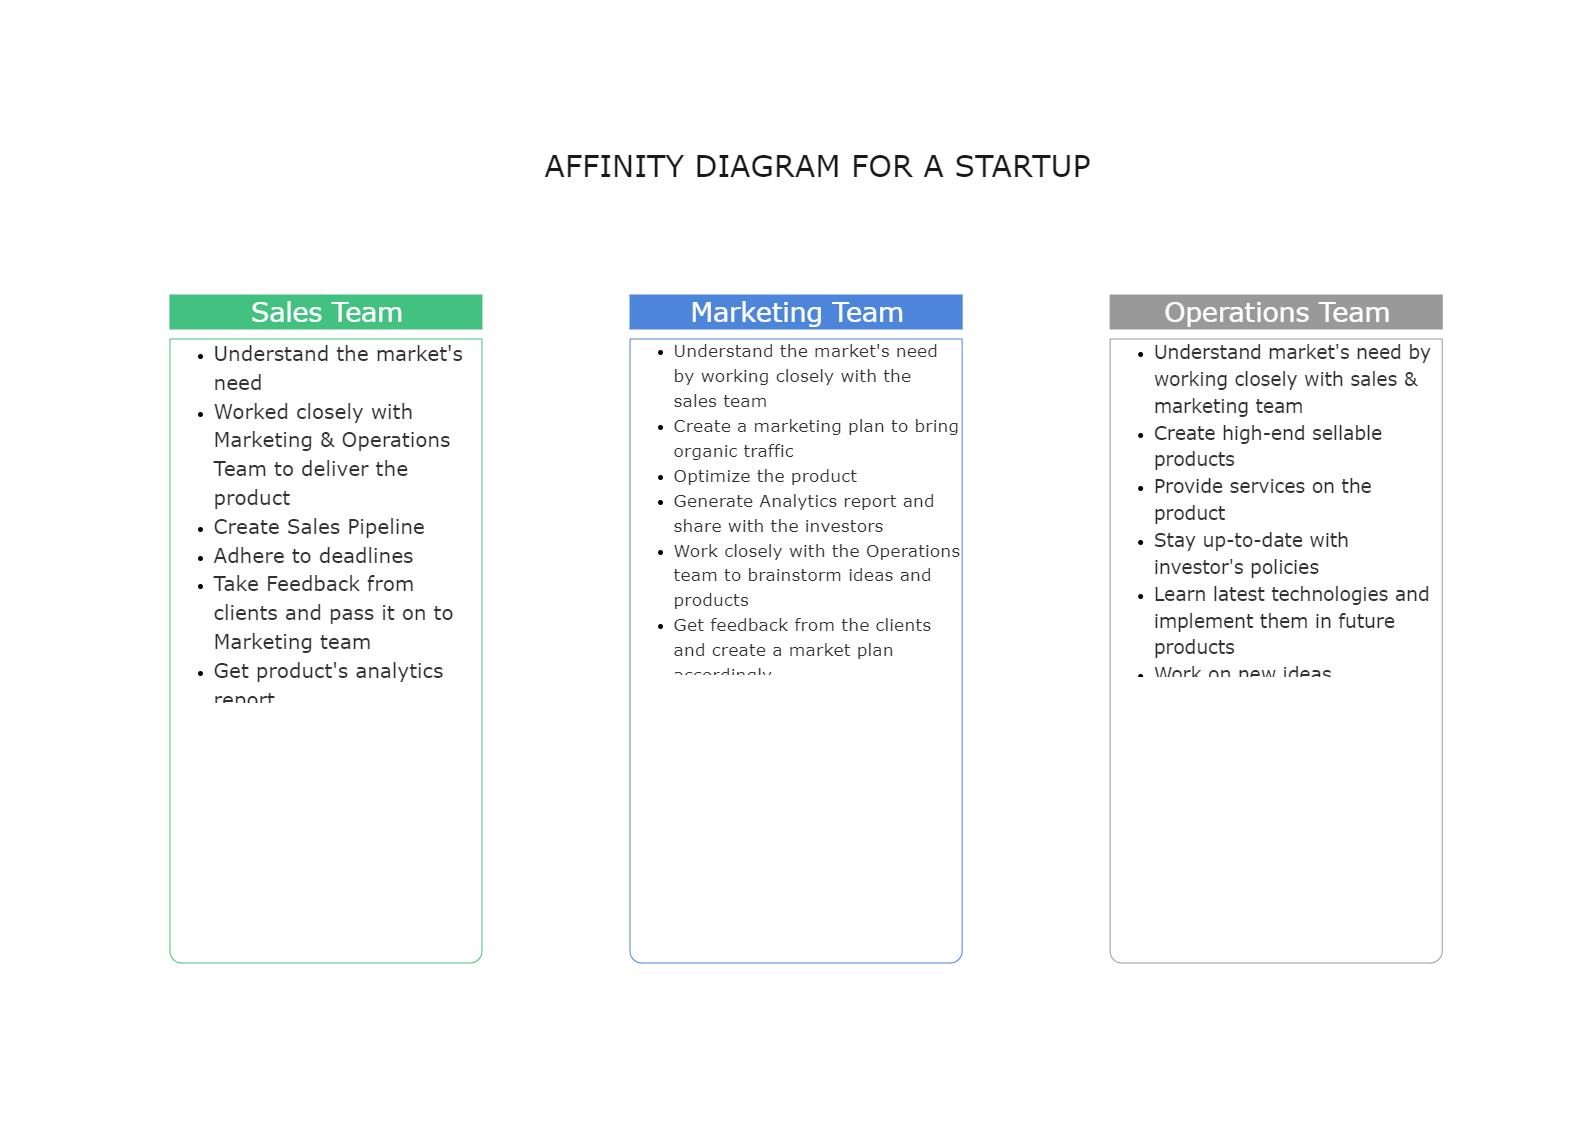 Affinity Diagram for a Startup